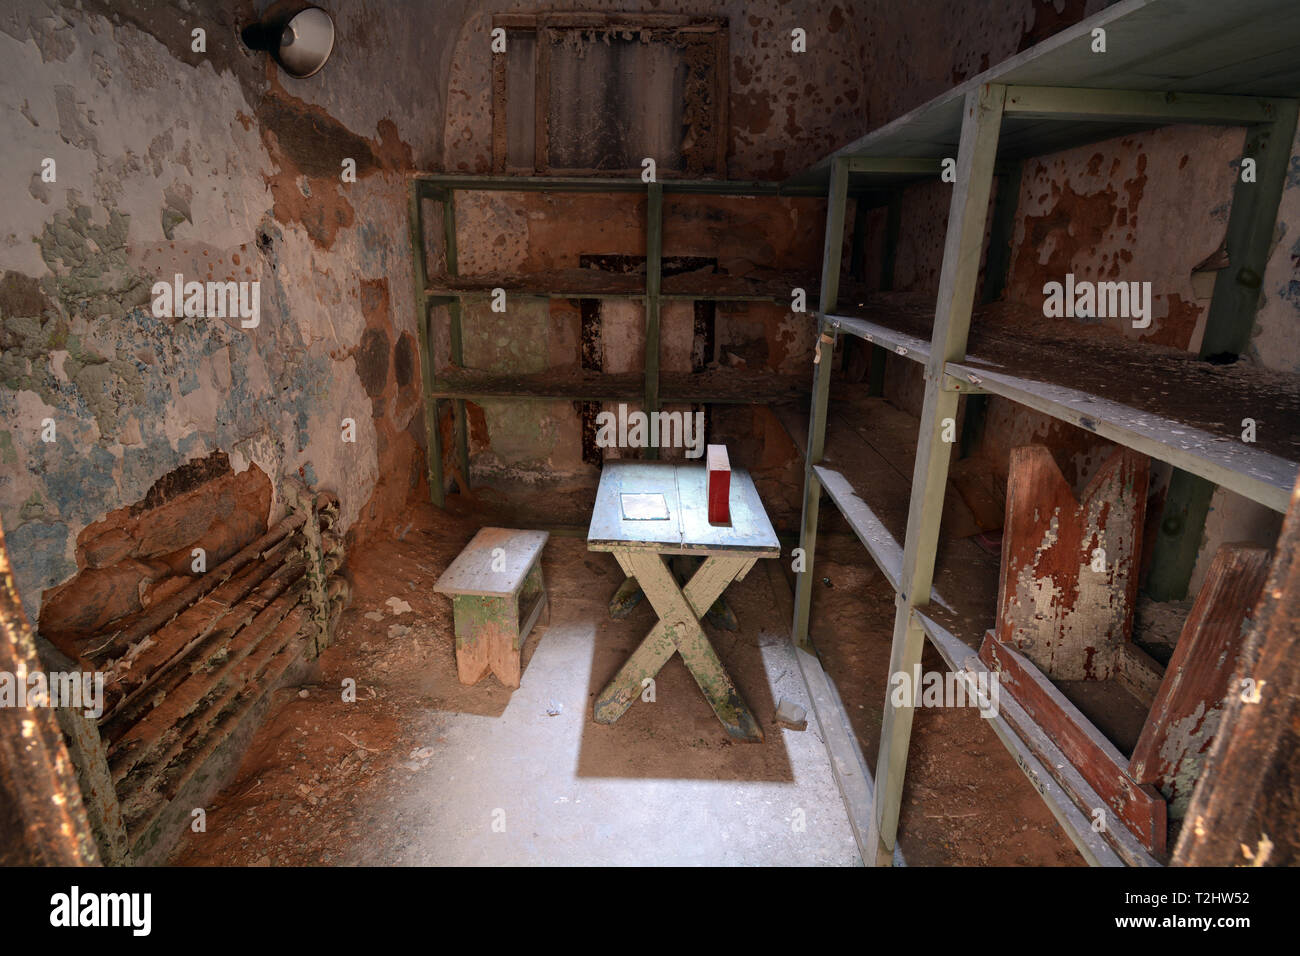 Eastern State Penitentiary - Cell With Wooden Shelves, Table and Stool In an Abandoned Prison Cell Stock Photo